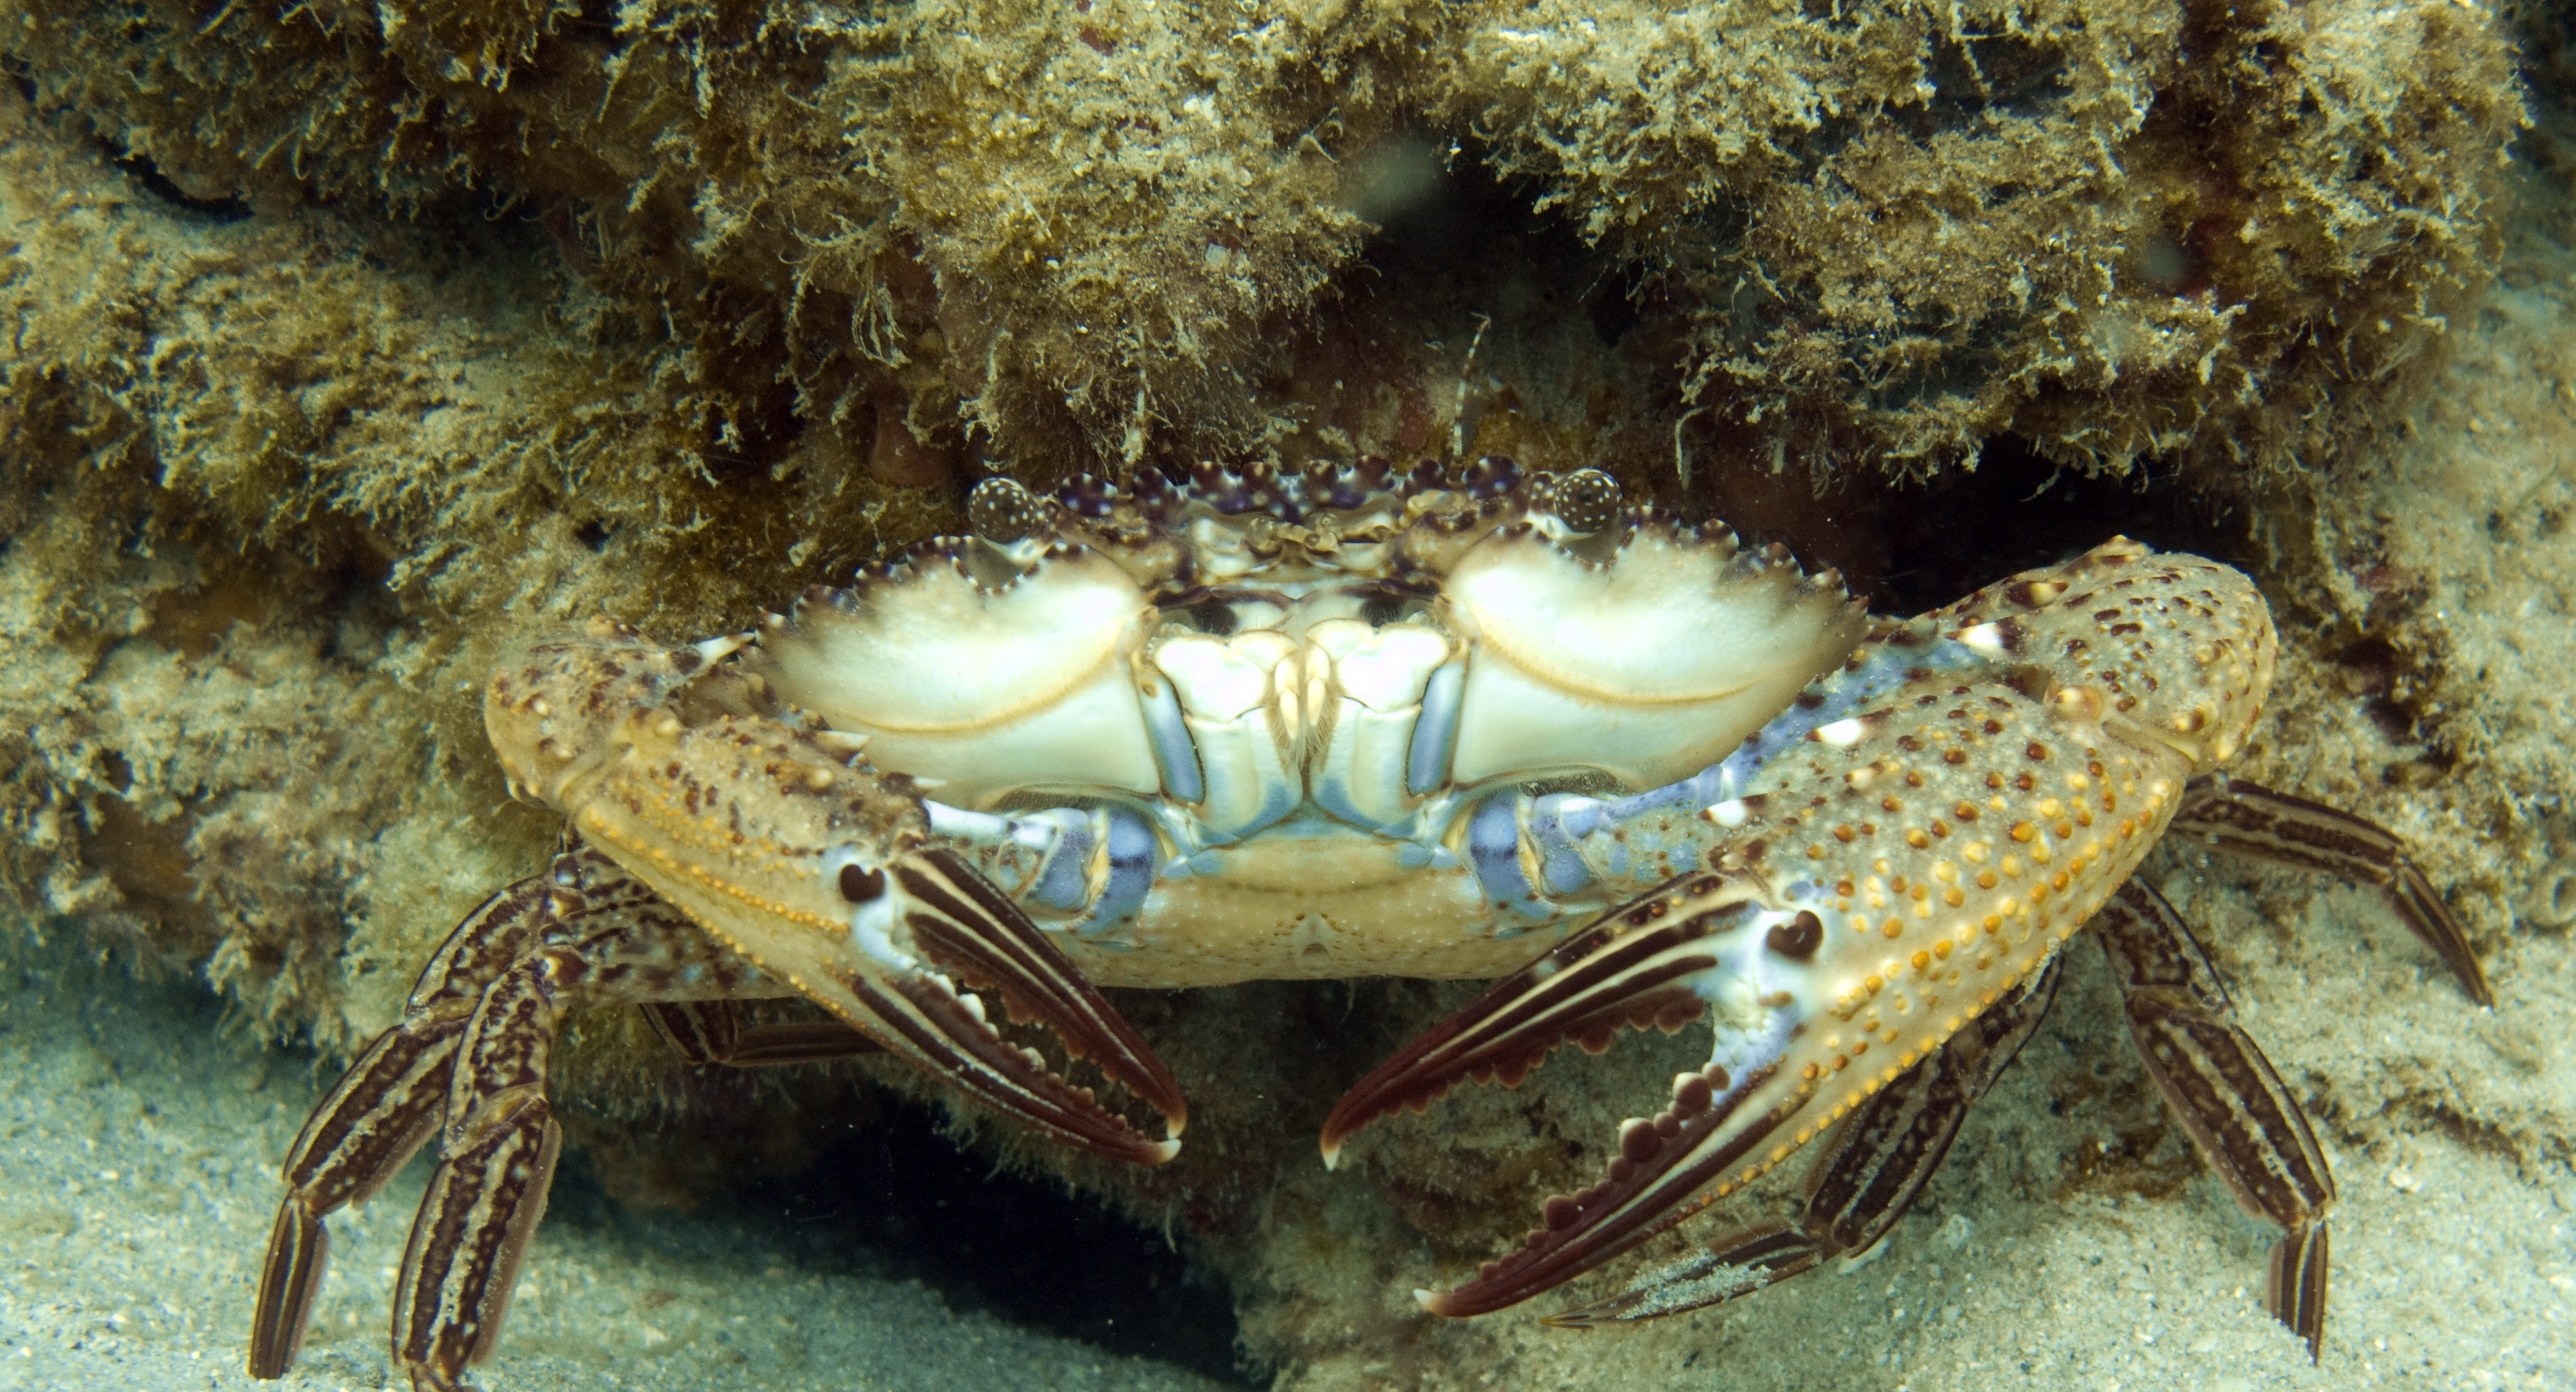 Englishtown dive site in Nova Scotia, Canada is home to crab who enjoys relaxing wharfside